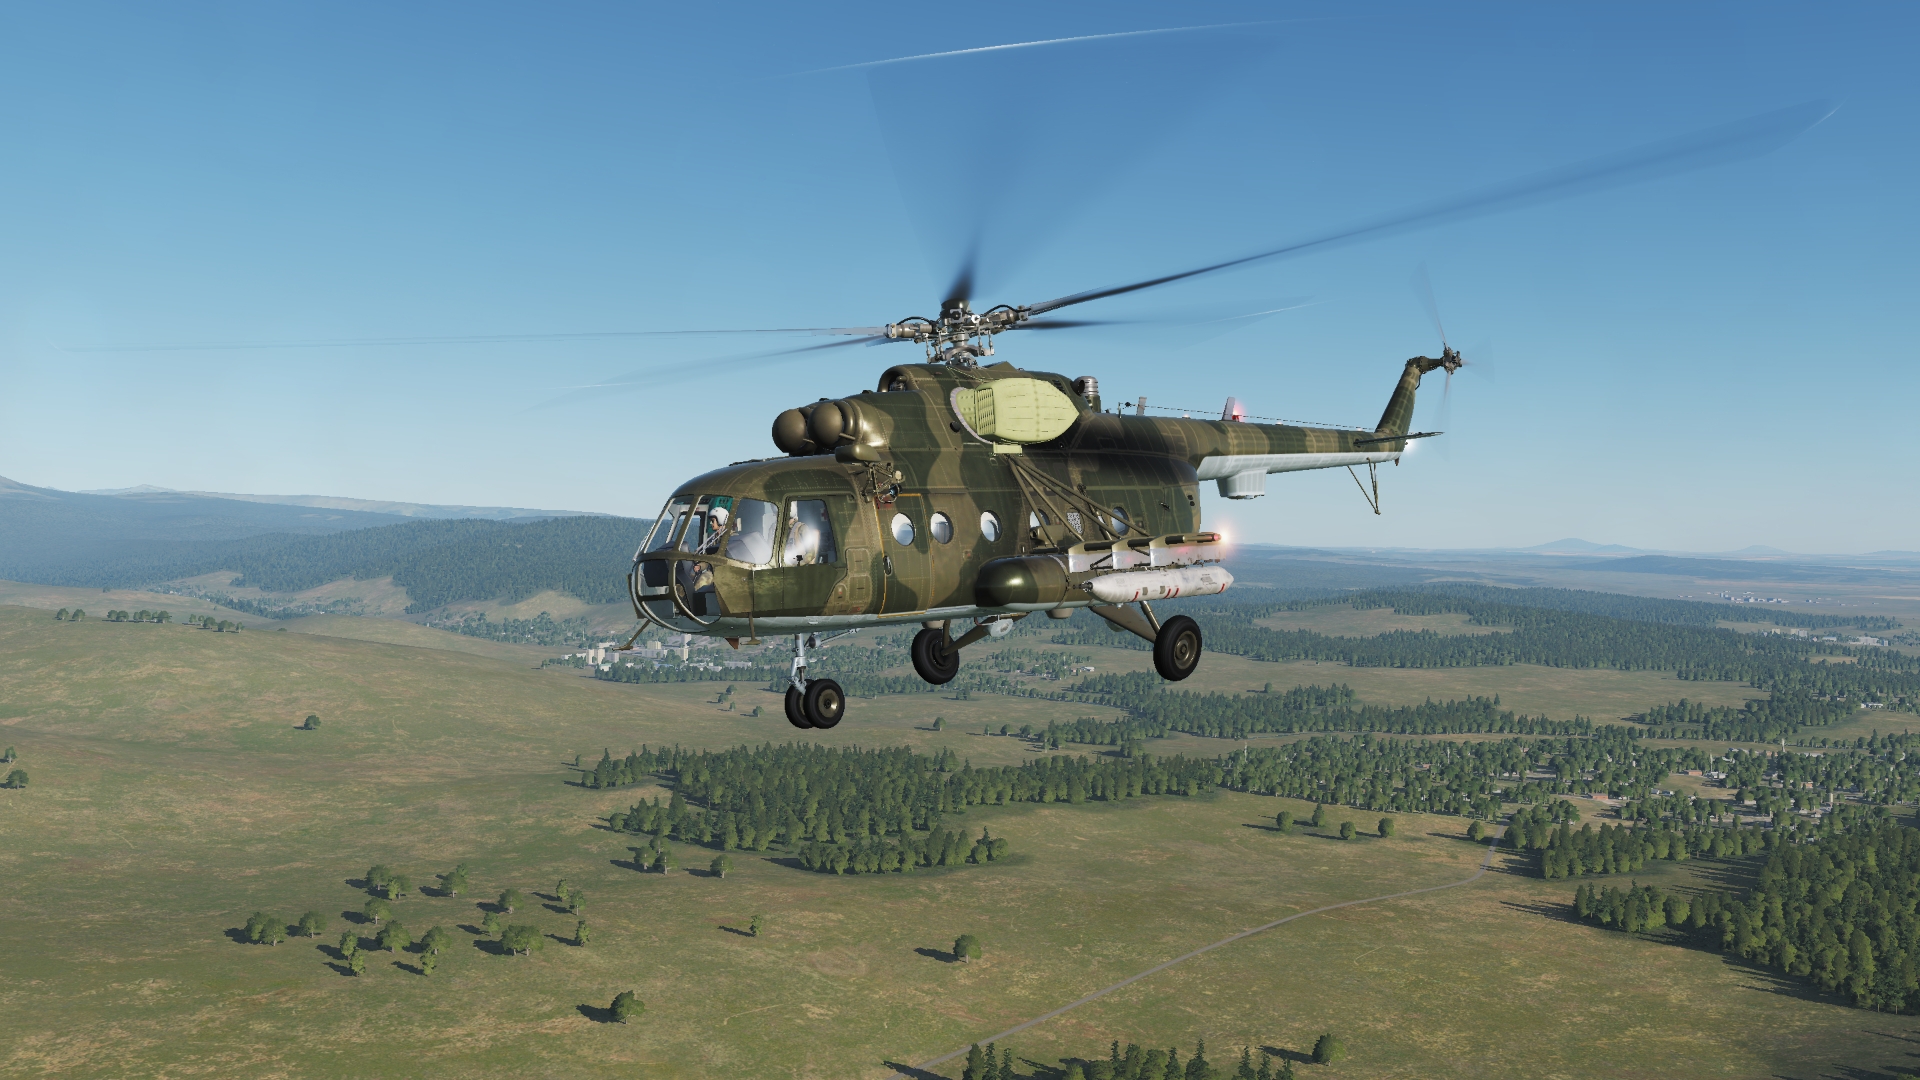 General 1920x1080 Digital Combat Simulator video games aircraft helicopters Mil Mi-8 PC gaming military military vehicle screen shot